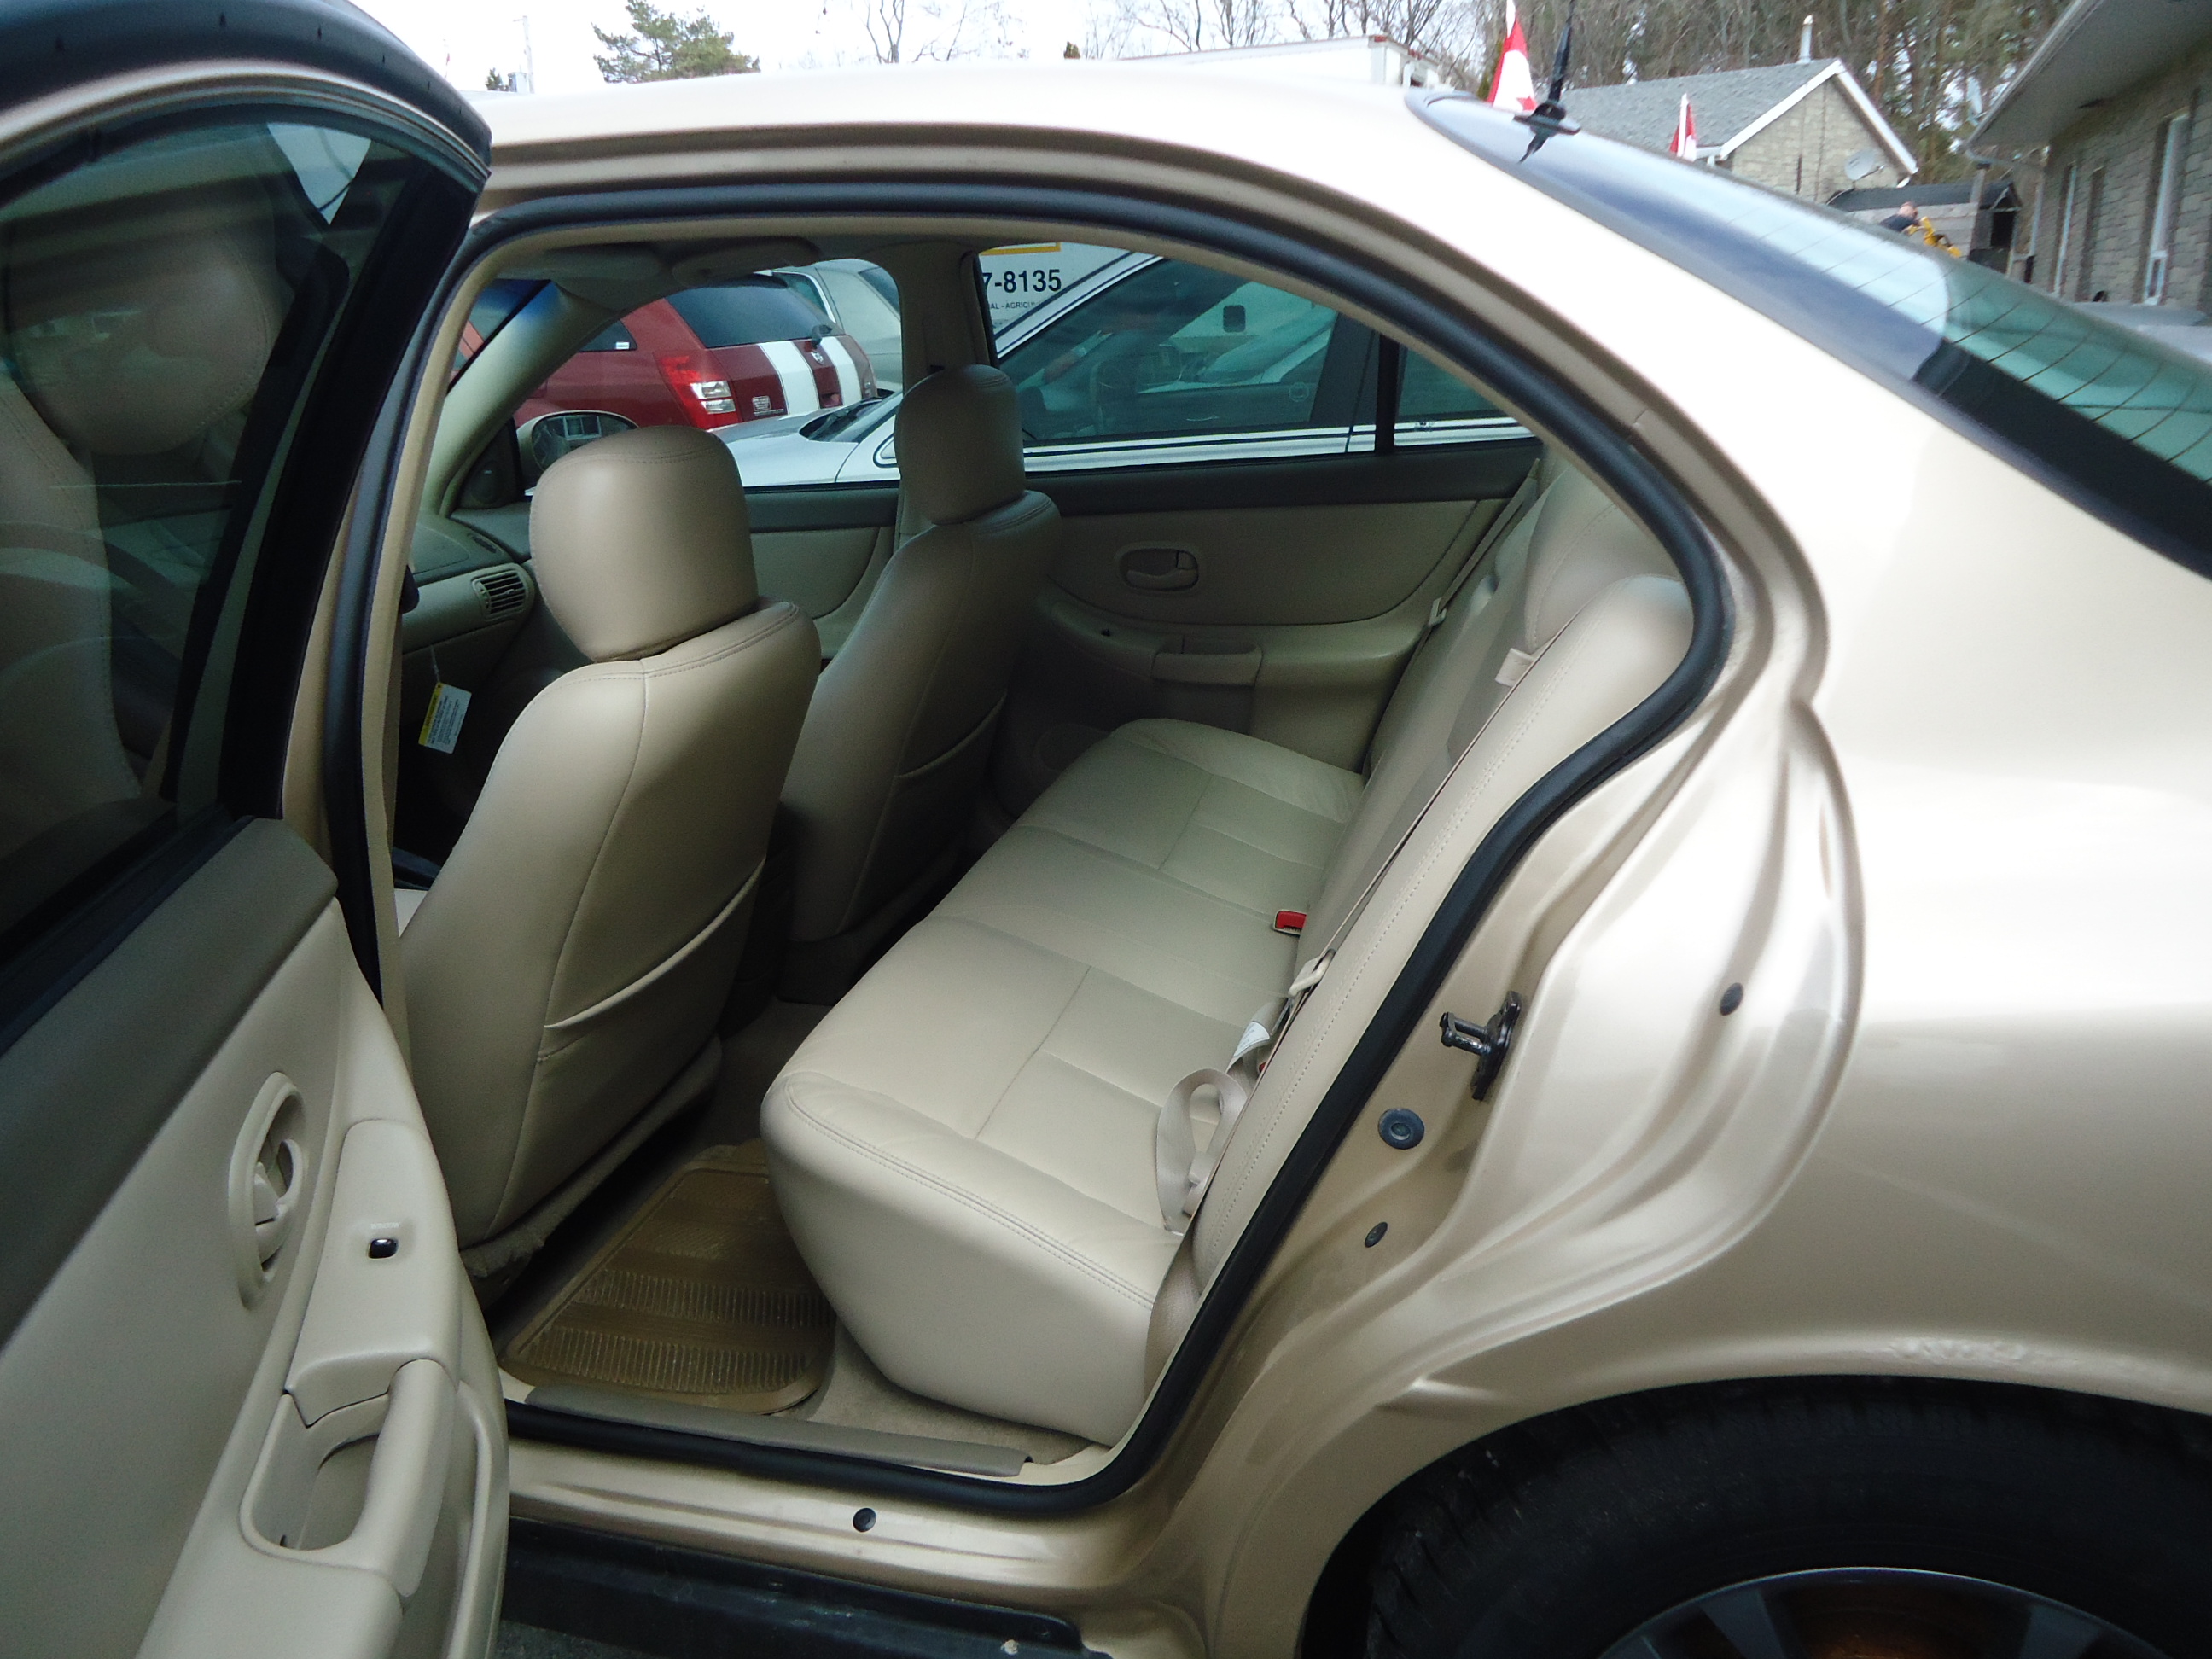 2002 Olds Intrigue Interior Bob Currie Auto Sales